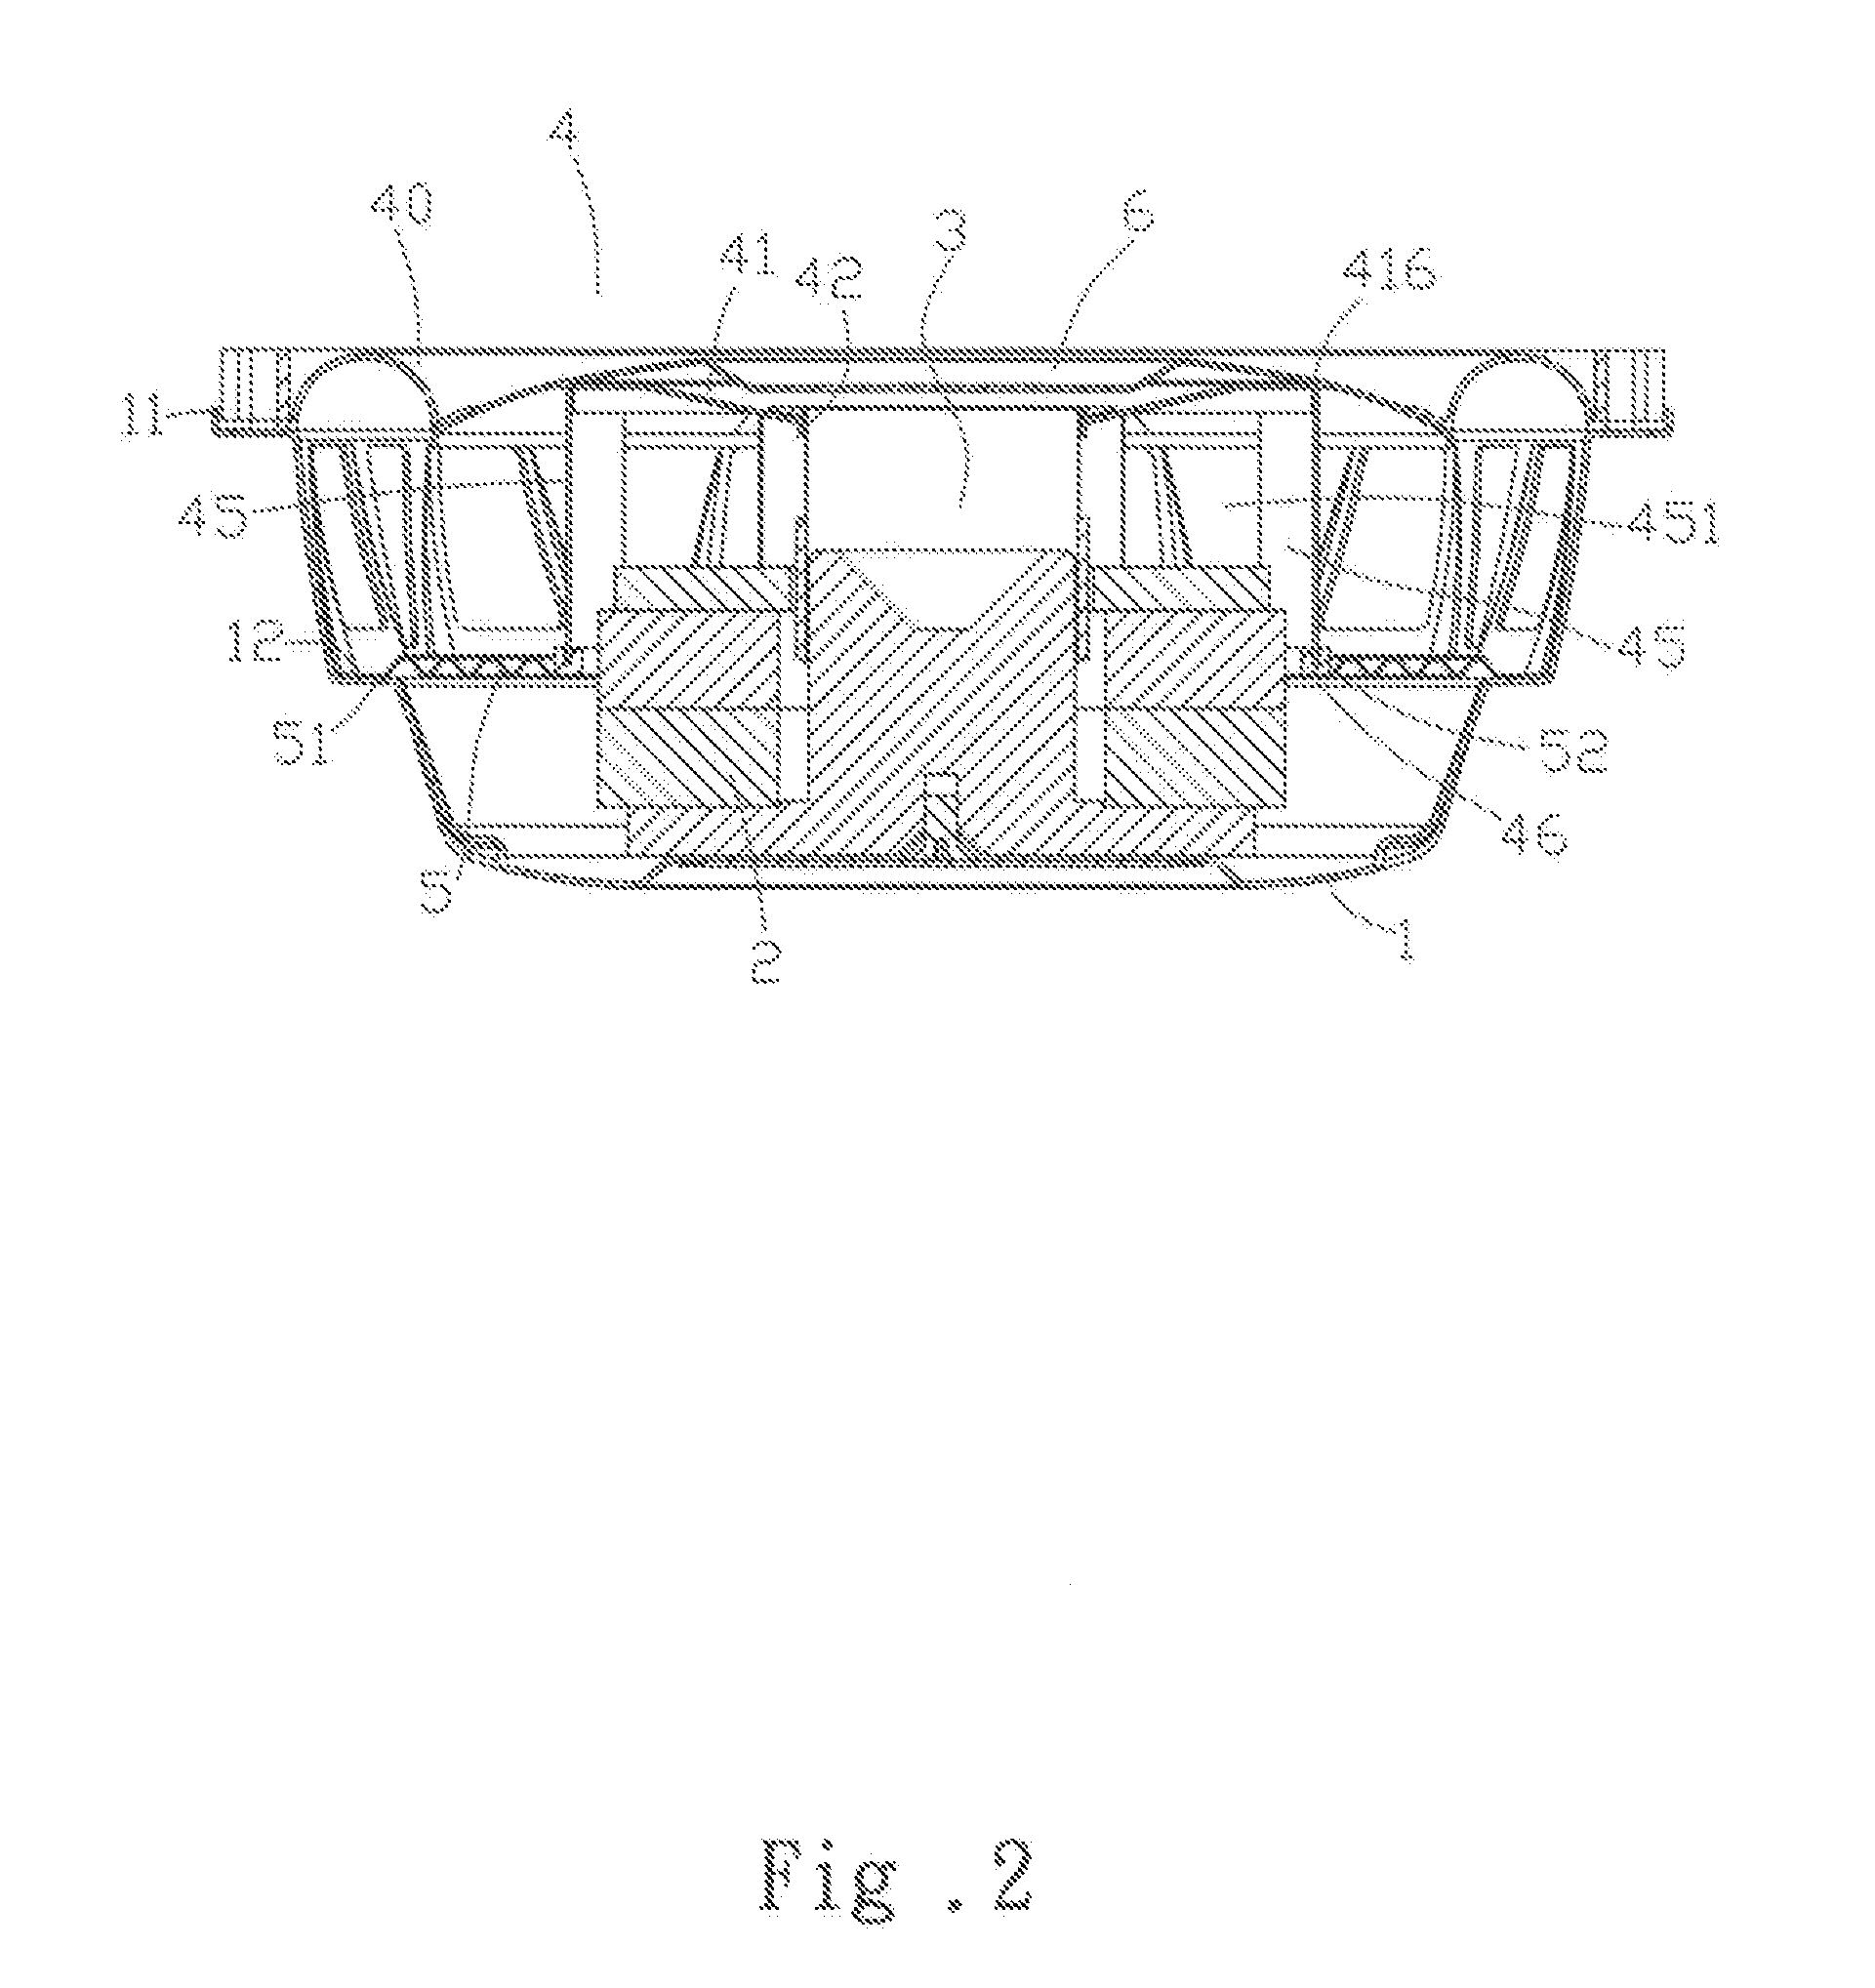 Speaker diaphragm supporting structure